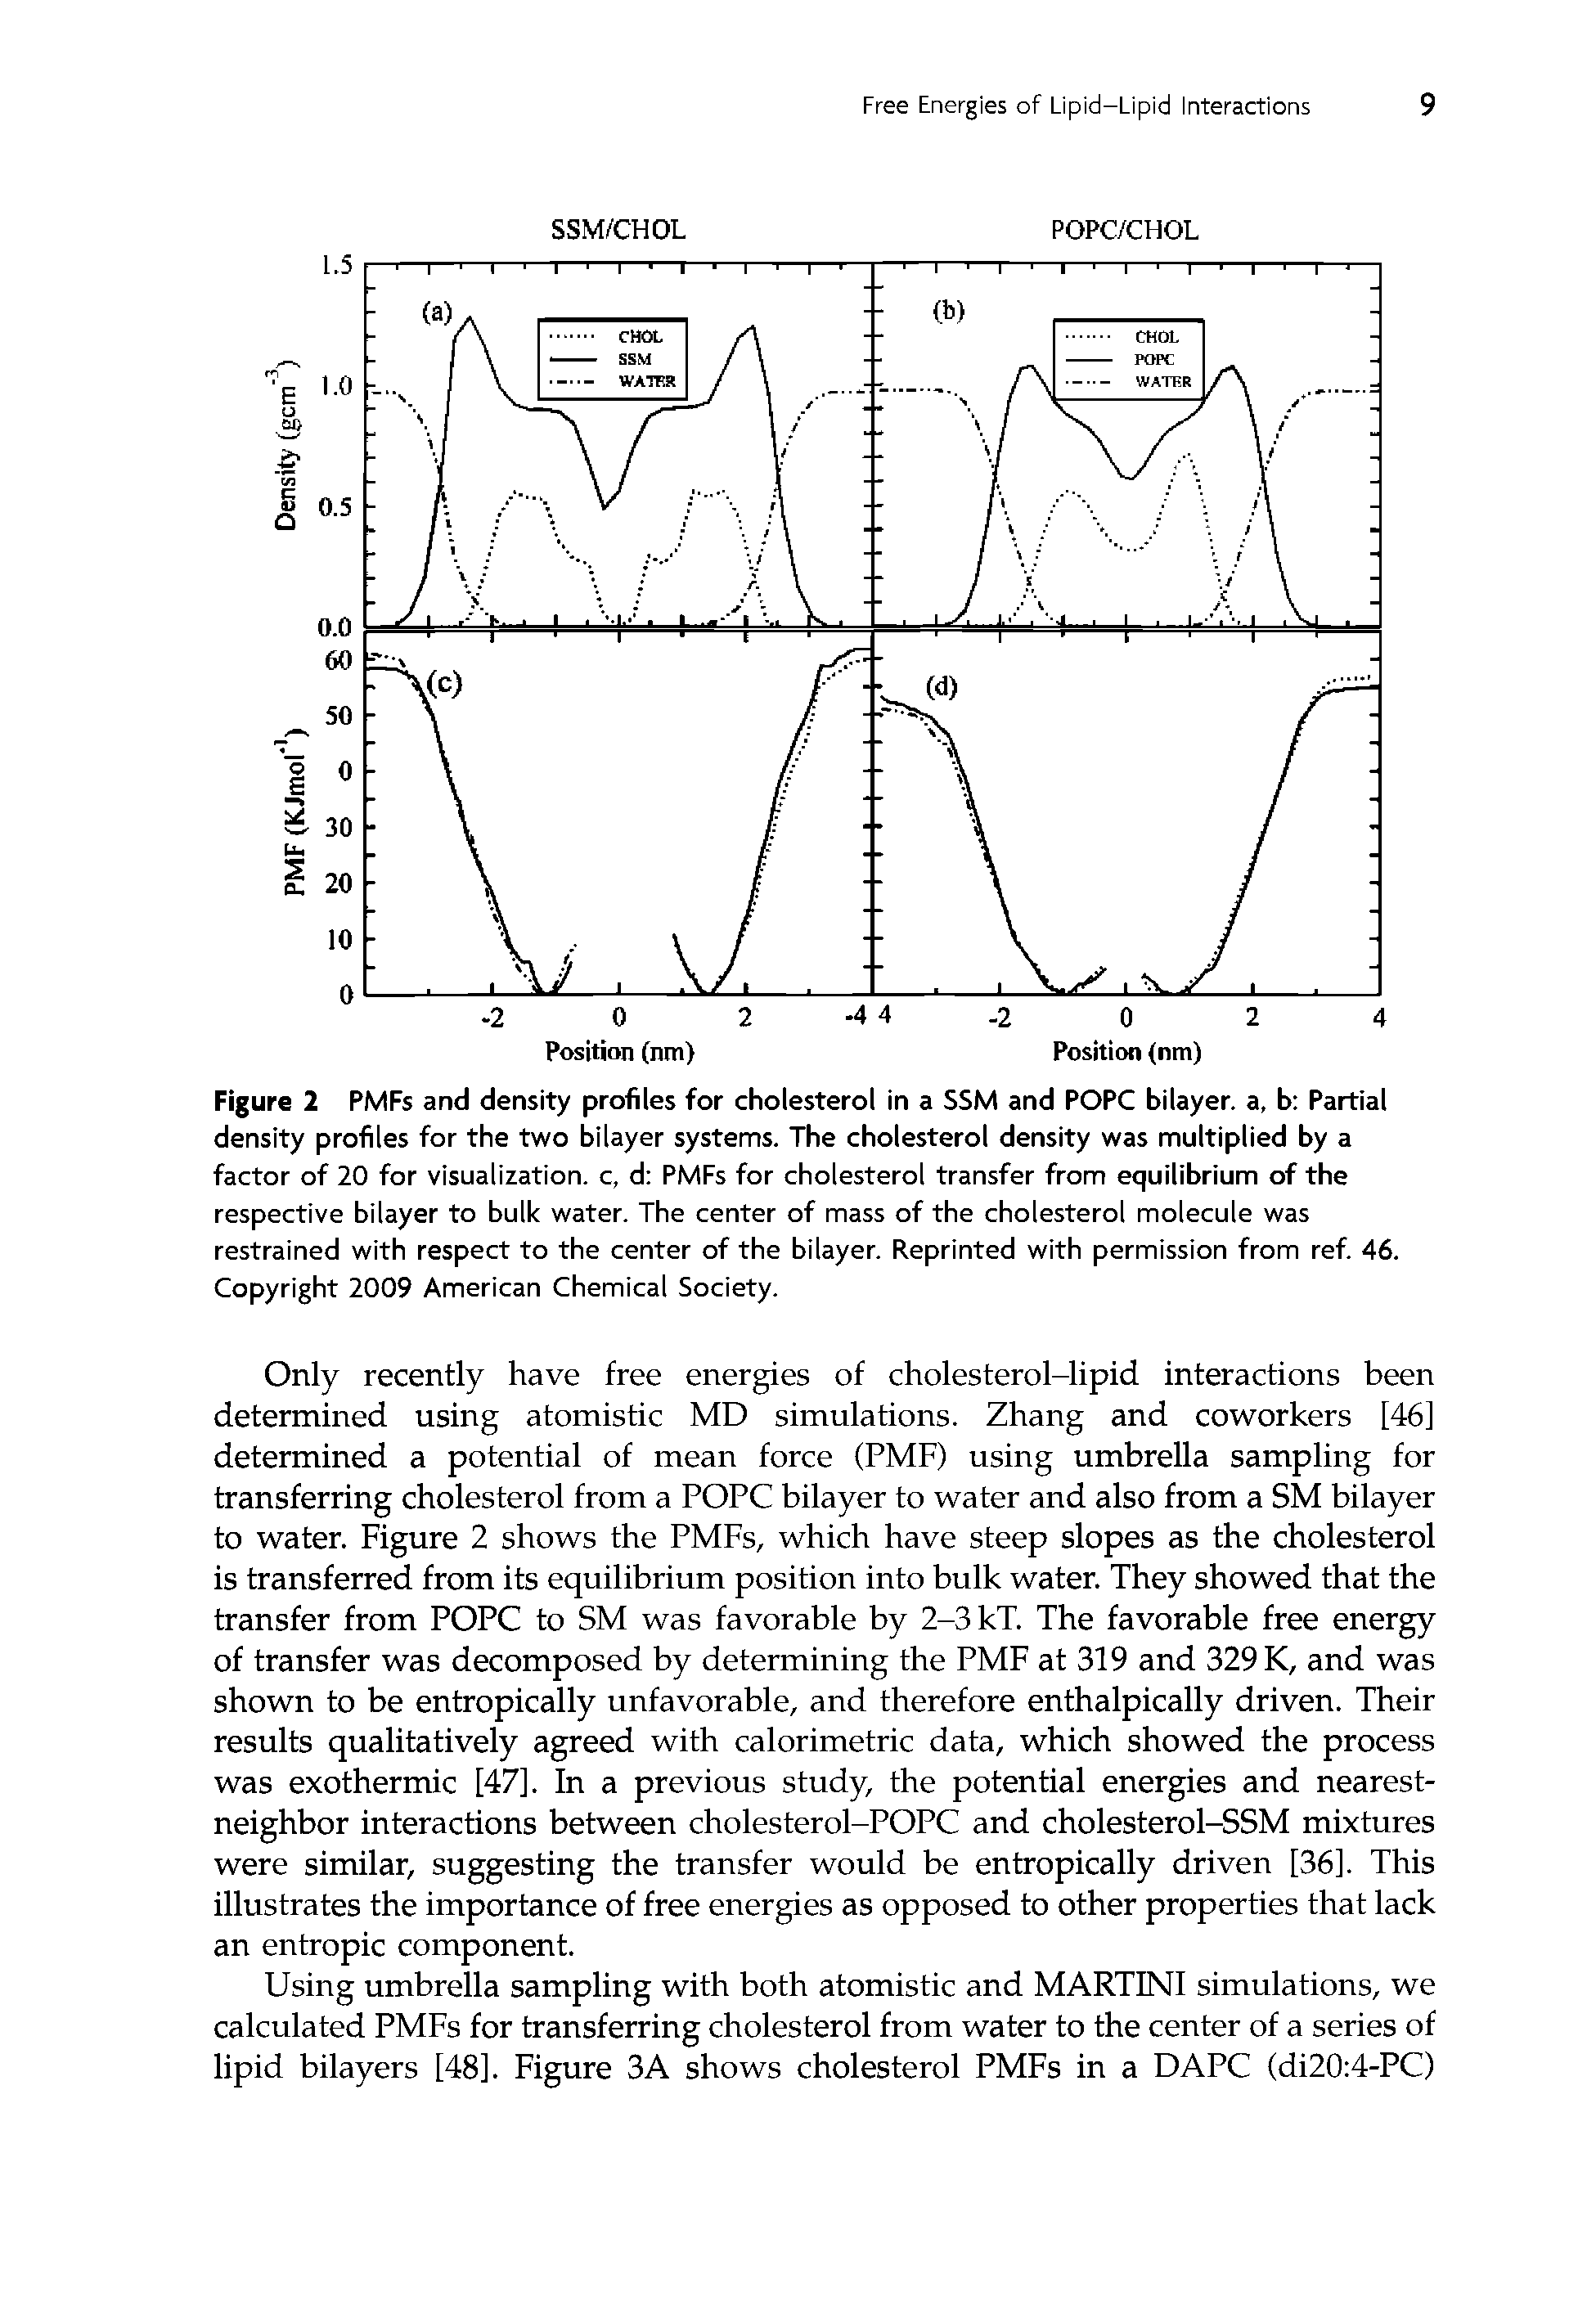 Figure 2 PMFs and density profiles for cholesterol in a SSM and POPC bilayer, a, b Partial density profiles for the two bilayer systems. The cholesterol density was multiplied by a factor of 20 for visualization, c, d PMFs for cholesterol transfer from equilibrium of the respective bilayer to bulk water. The center of mass of the cholesterol molecule was restrained with respect to the center of the bilayer. Reprinted with permission from ref. 46. Copyright 2009 American Chemical Society.